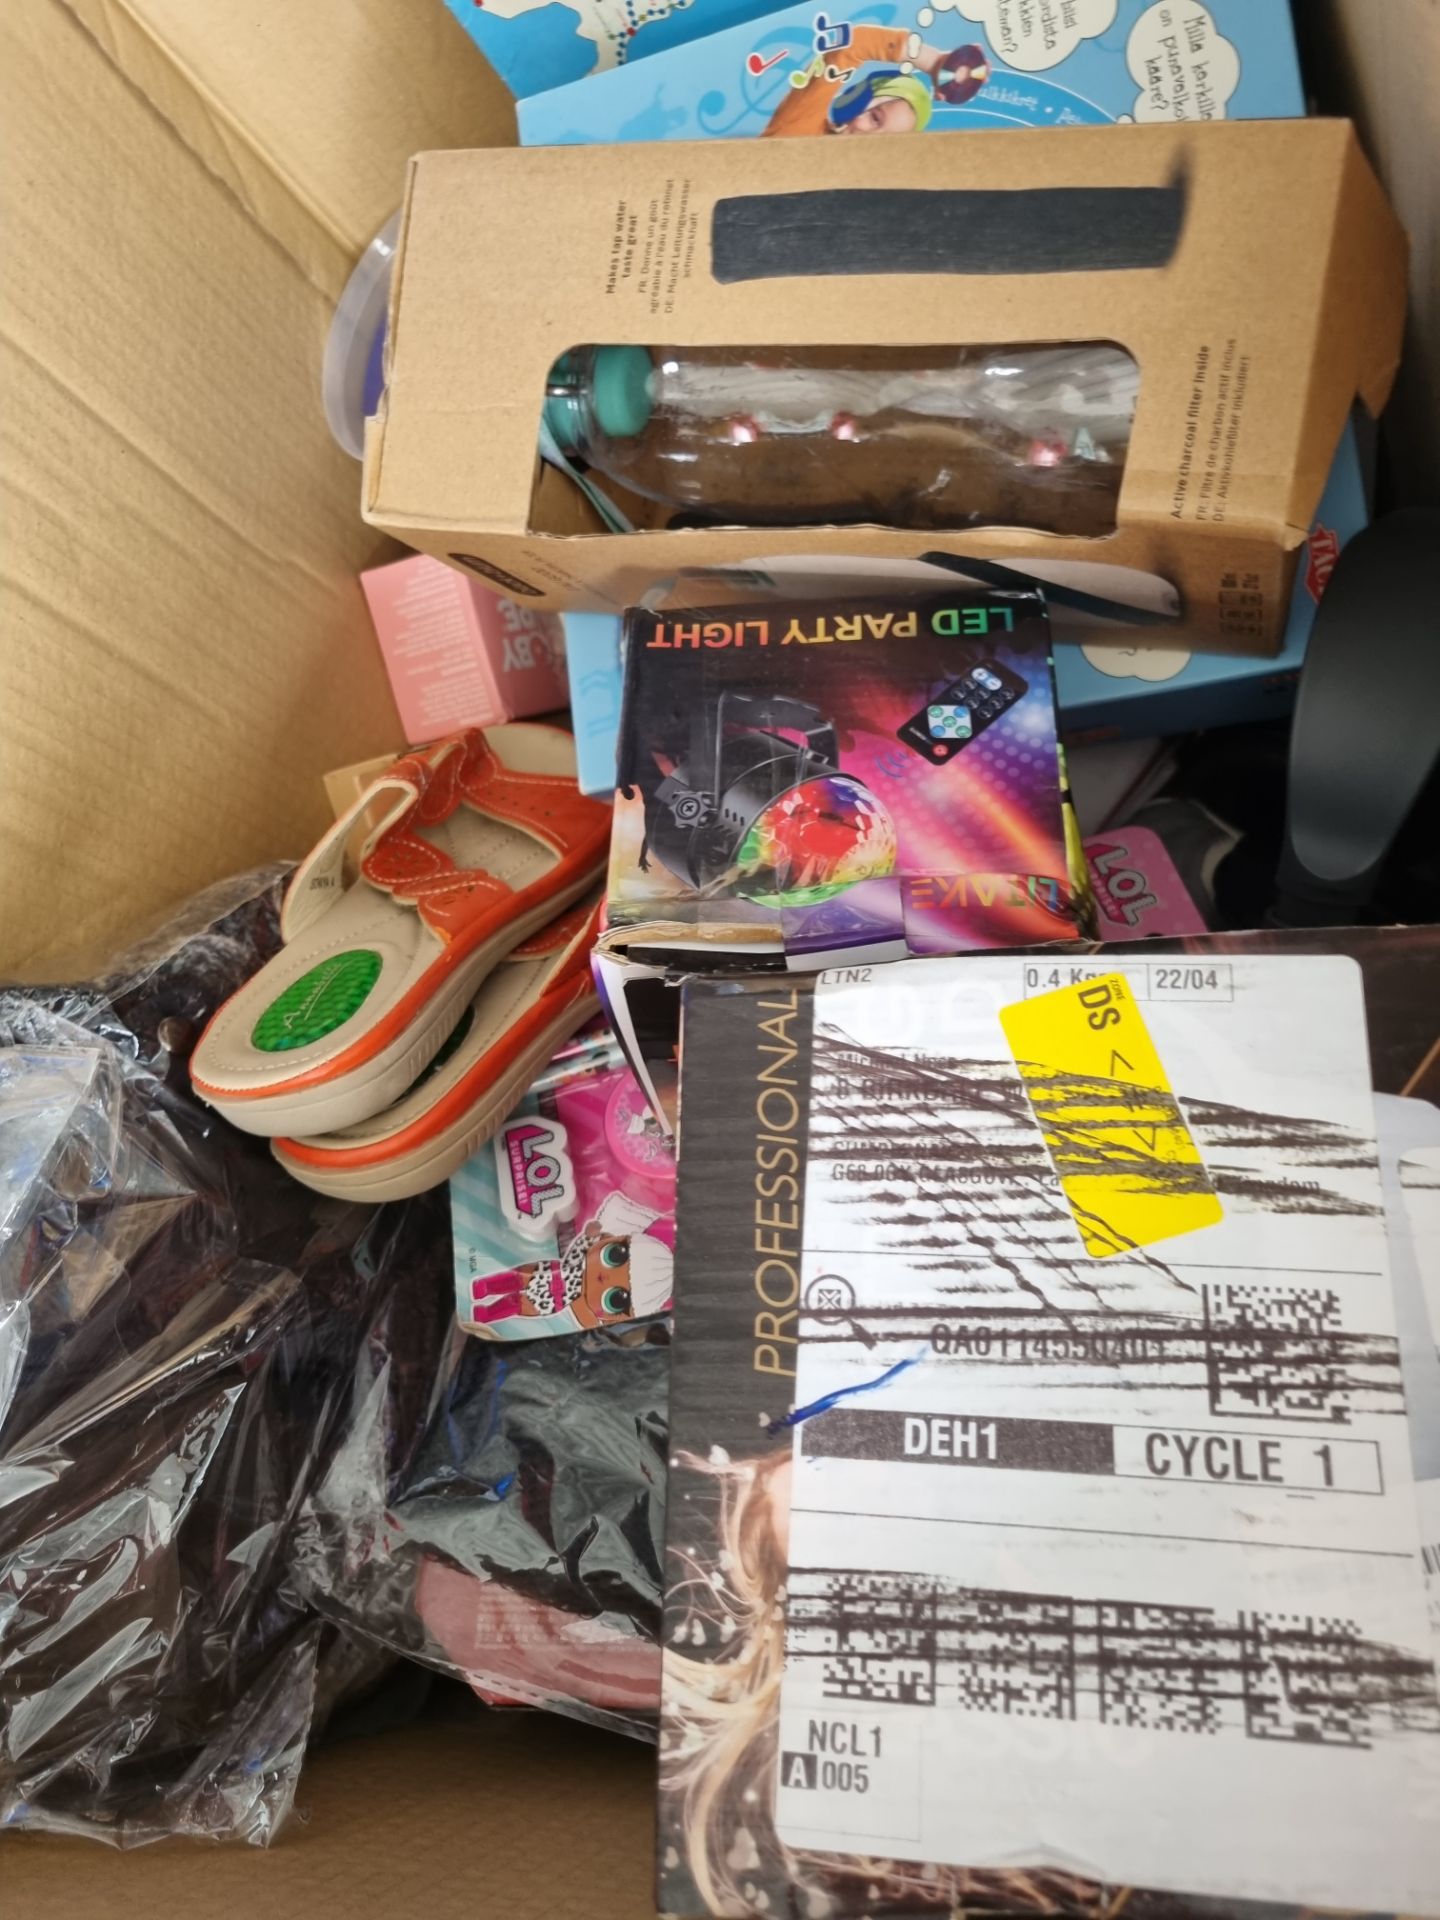 Mixed Retail Returns - Baby and Household Lot 3